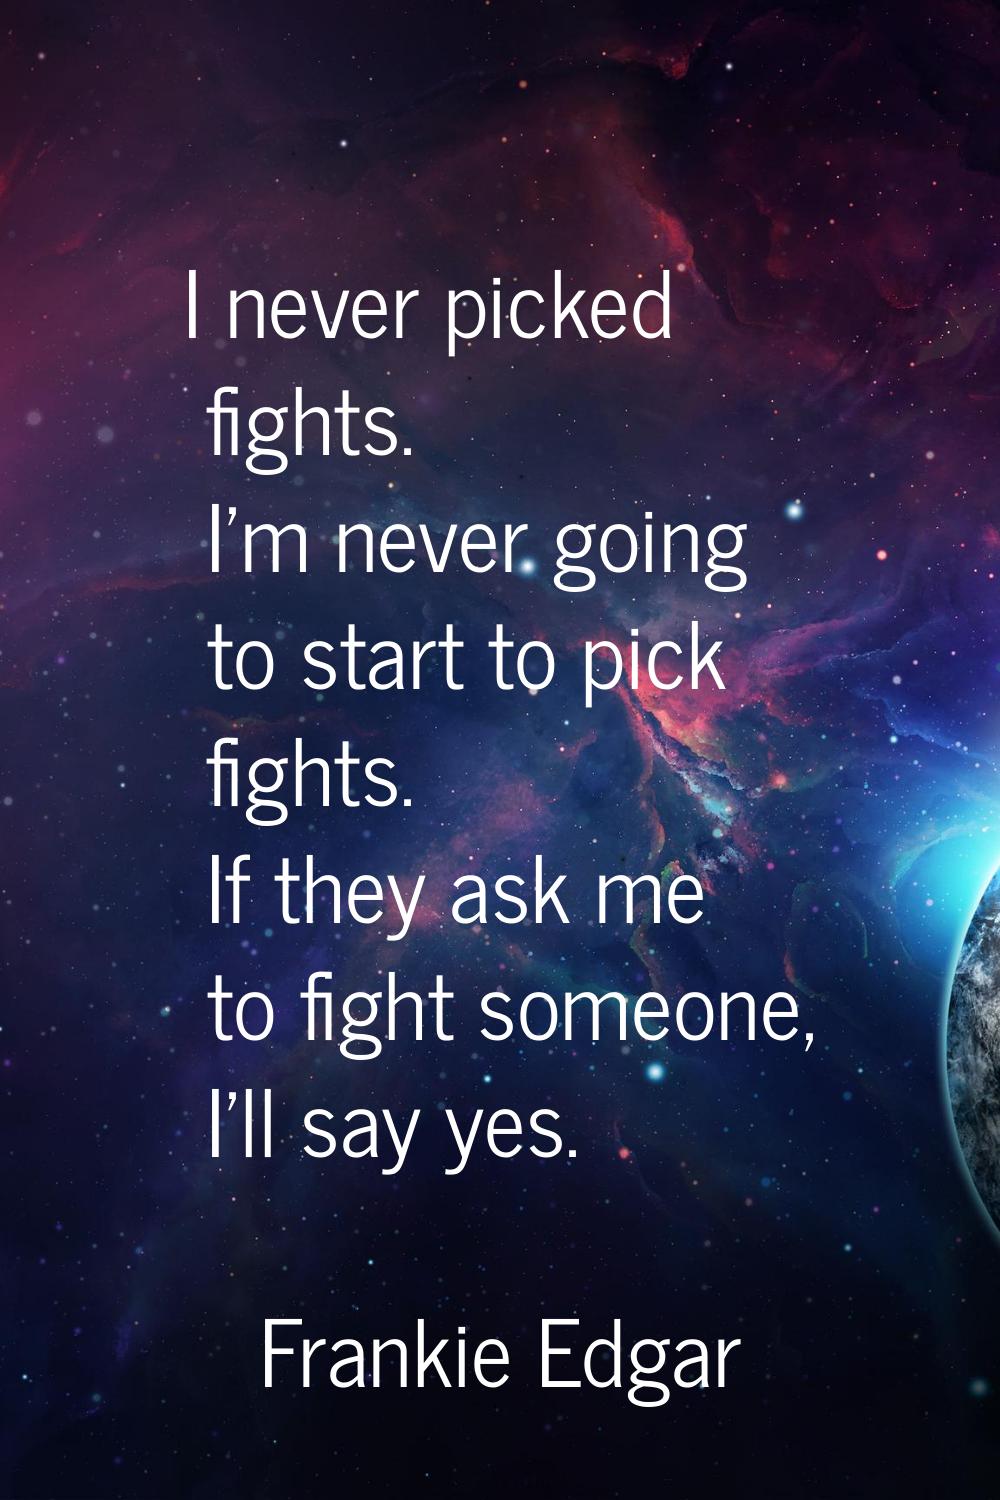 I never picked fights. I'm never going to start to pick fights. If they ask me to fight someone, I'